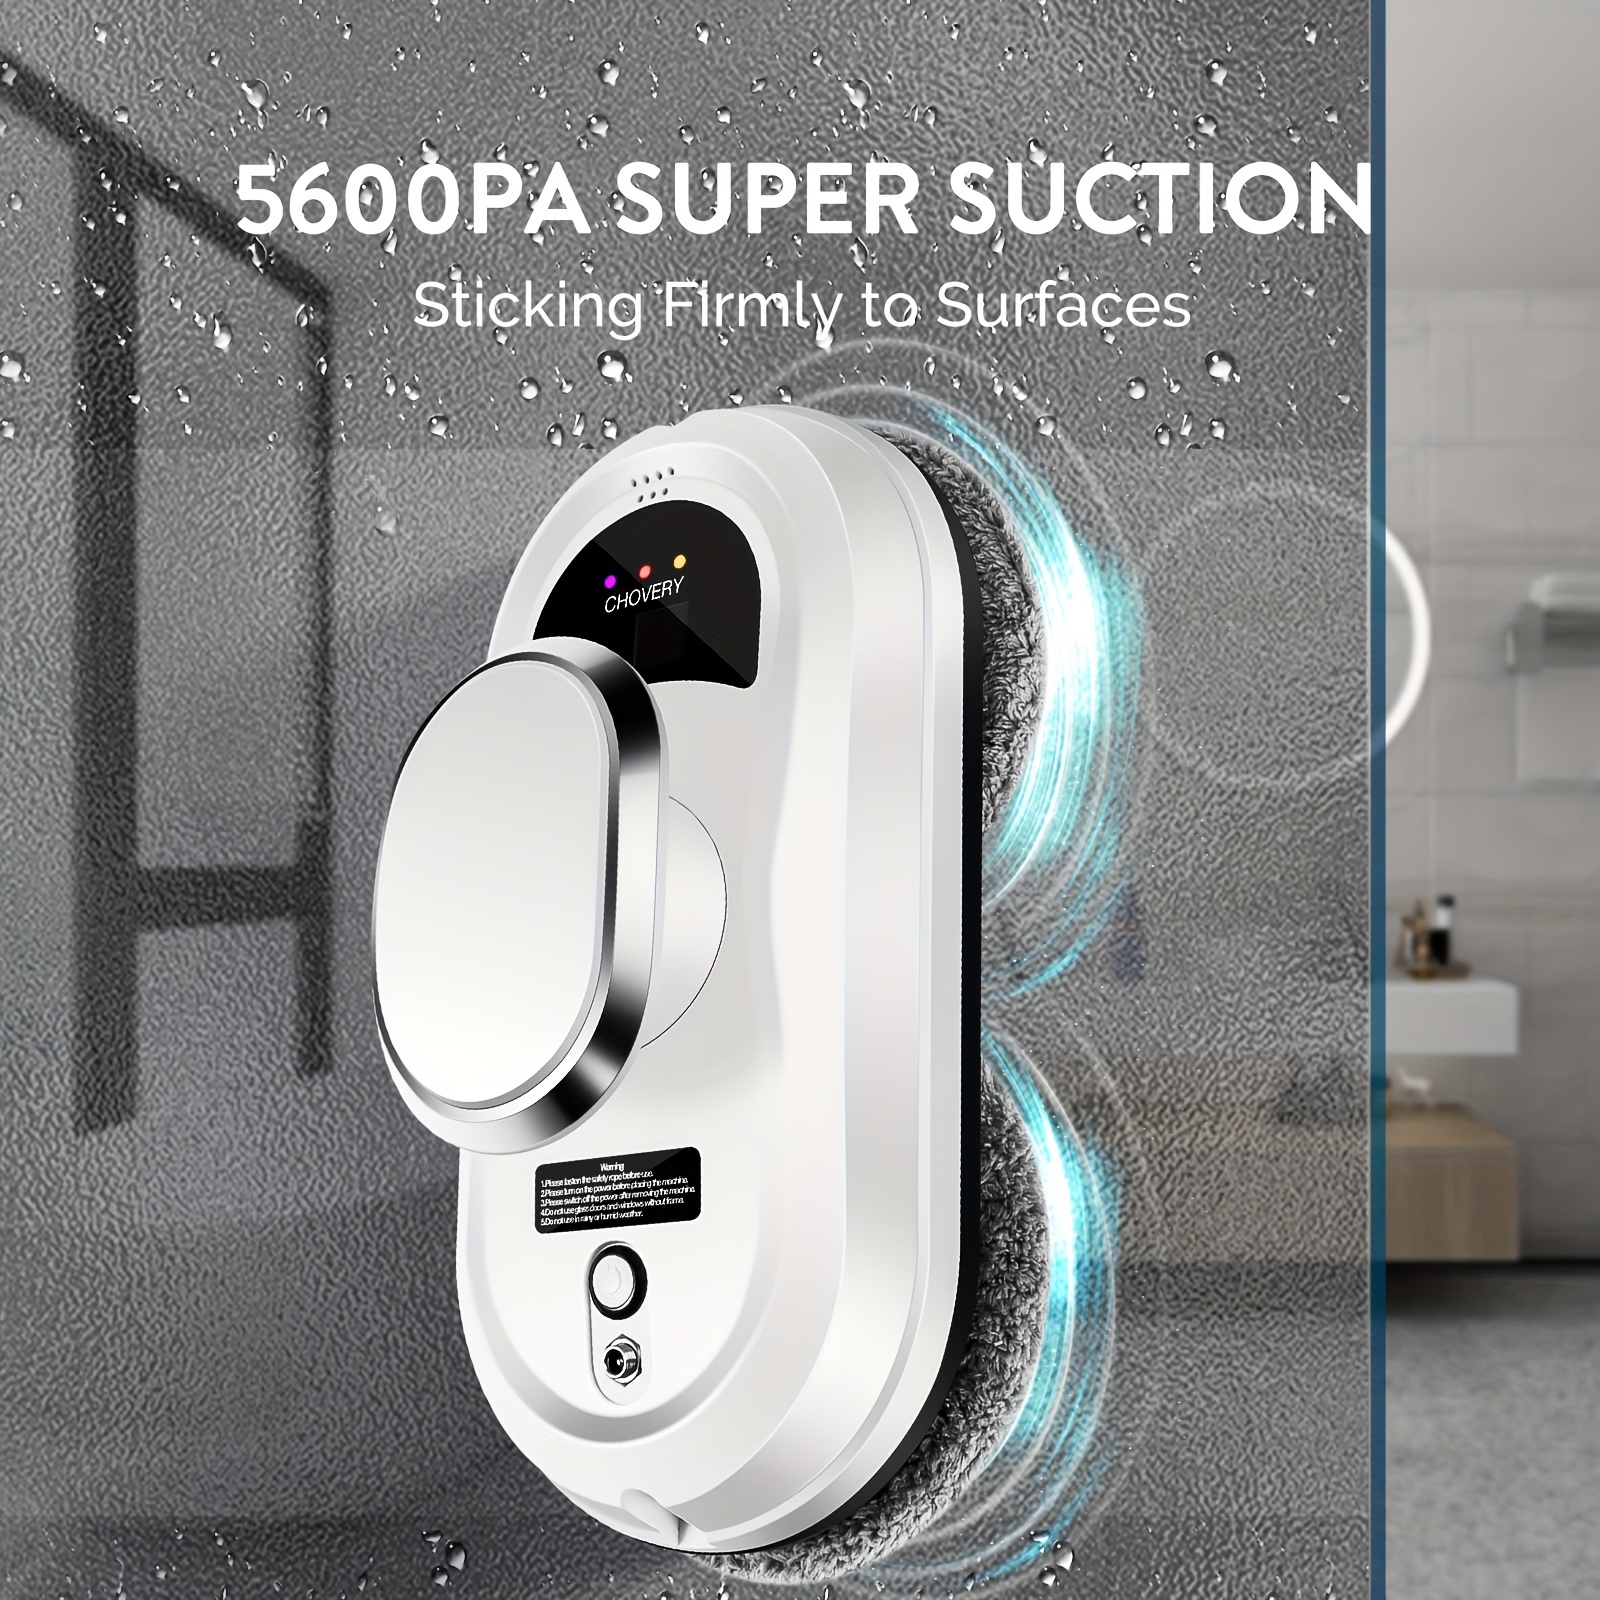 

Window Cleaner Robot, Cleaning Robotic With 5600pa Strong Suction, Remote Control Window Cleaning Robot For Windows/tiles/class Door